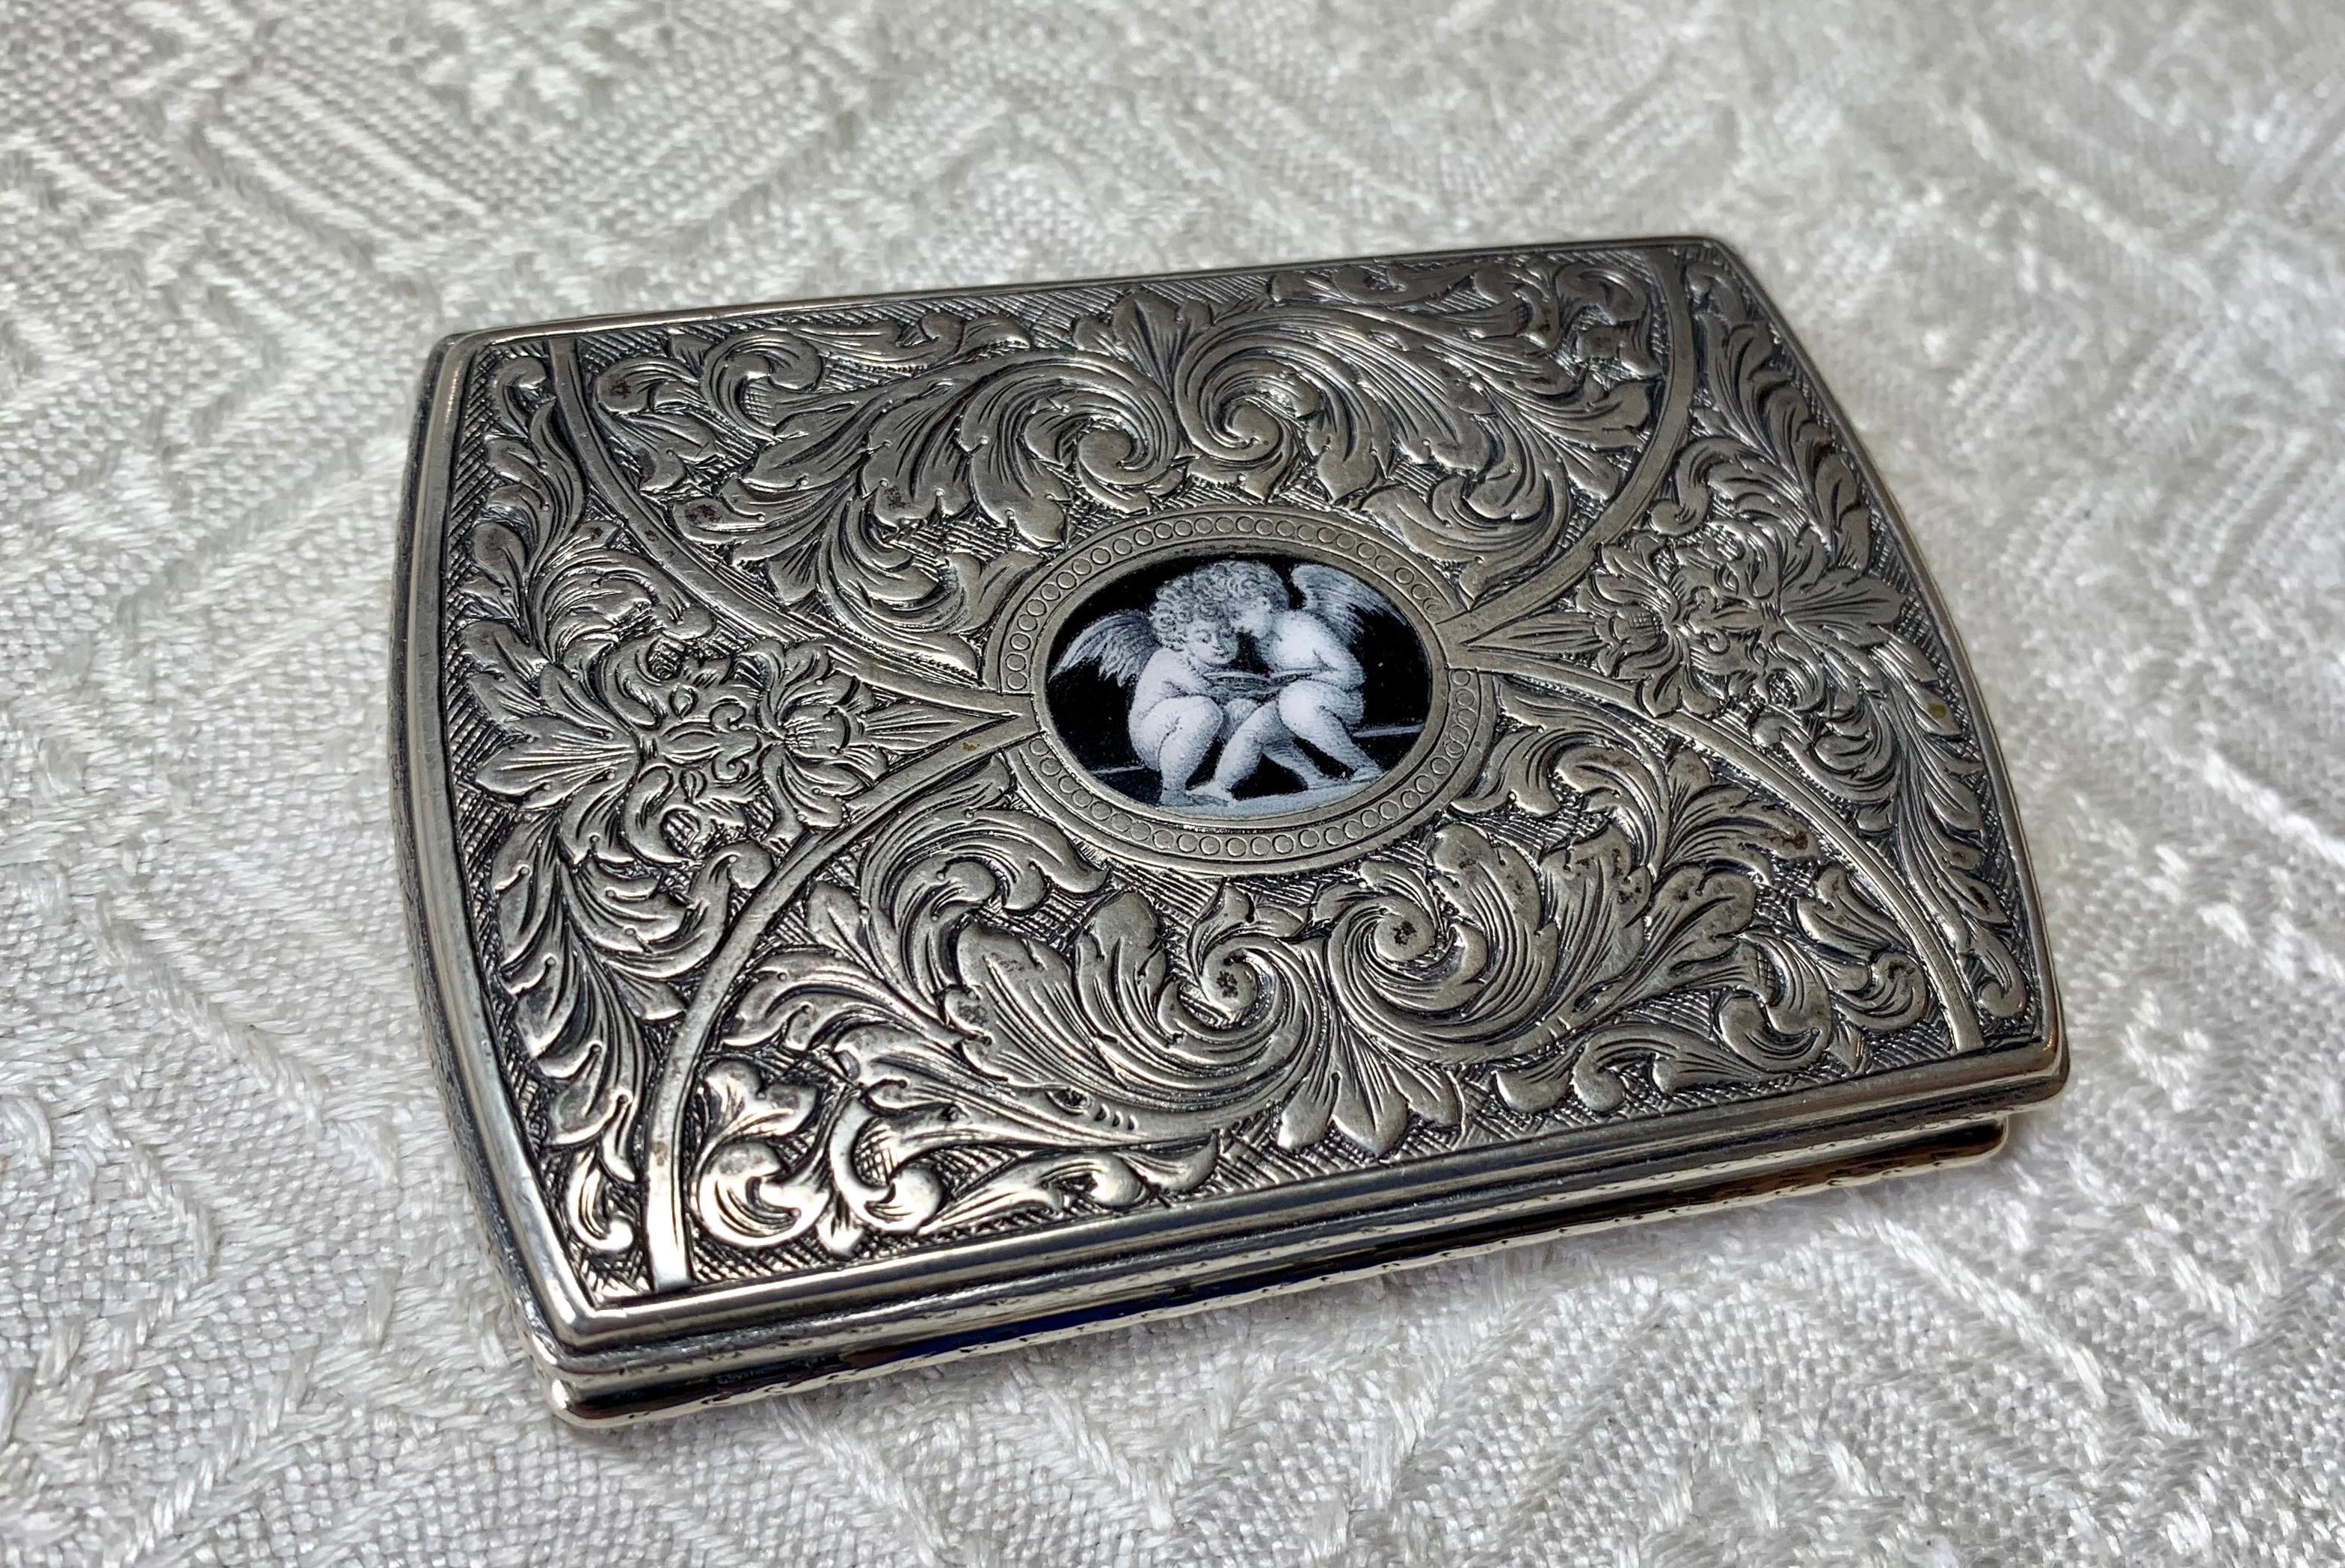 AN EXTREMELY RARE SILVER ENAMEL BOX OF EXTRAORDINARY BEAUTY WITH A CENTRAL GRISAILLE ENAMEL IMAGE OF TWO CHERUB OR ANGELS READING A BOOK - STUNNING QUALITY!  THE SILVER BOX WITH ACANTHUS REPOUSSE AND ENGRAVED WORK WITH FACES ON EITHER SIDE OF THE